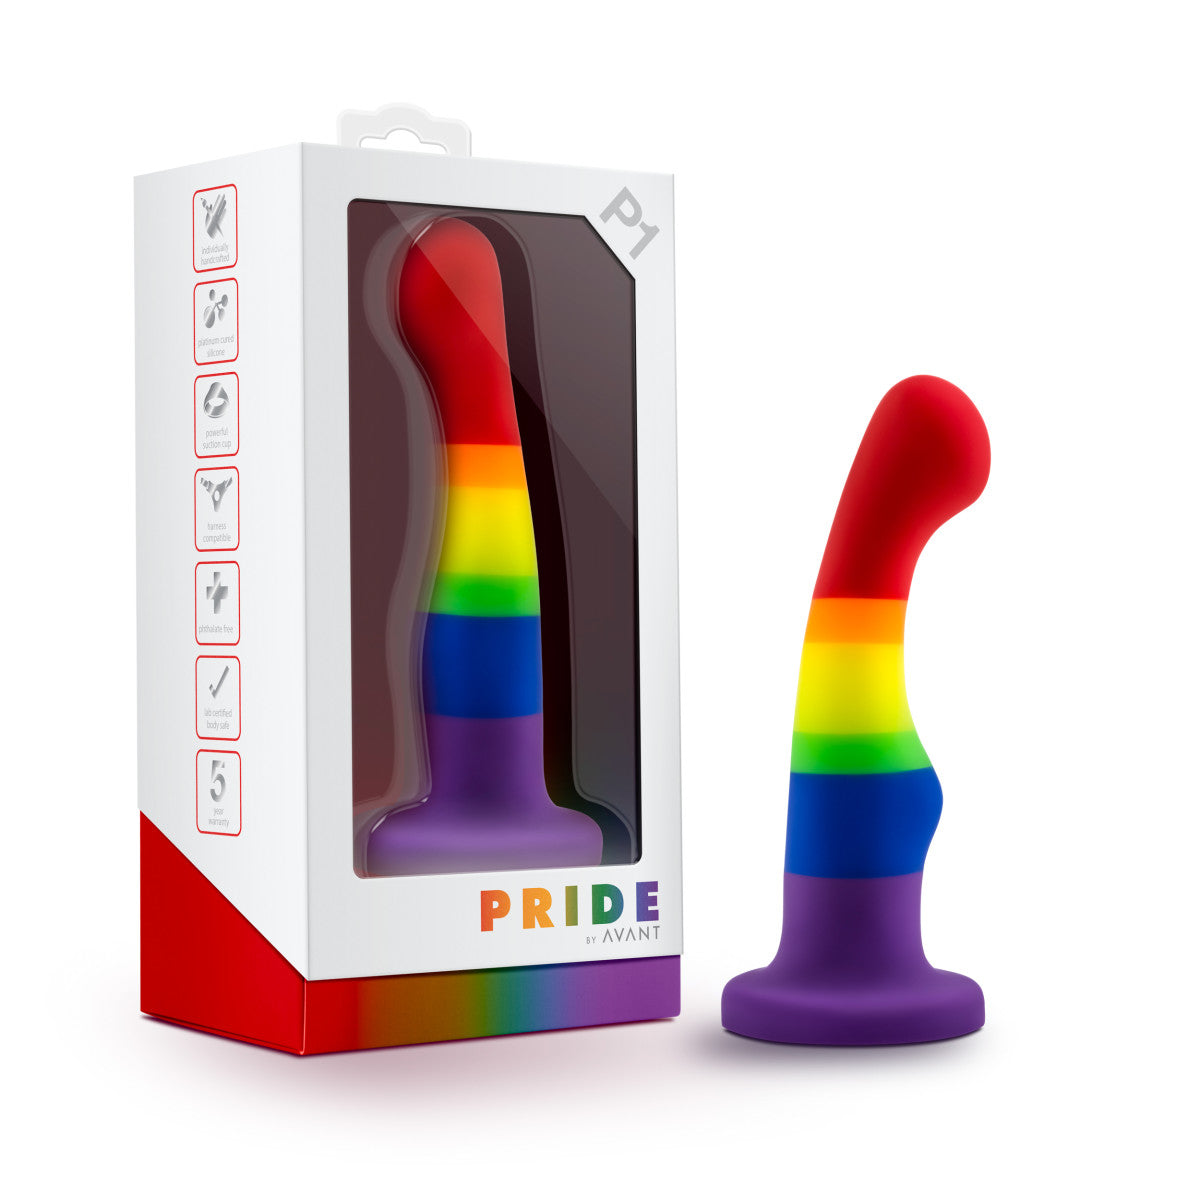 Blush Avant | Pride Freedom P1 | Artisan 6 Inch Curved G-Spot Dildo with Suction Cup Base | Elegantly Made with Smooth UltraSilk® Purio® Silicone